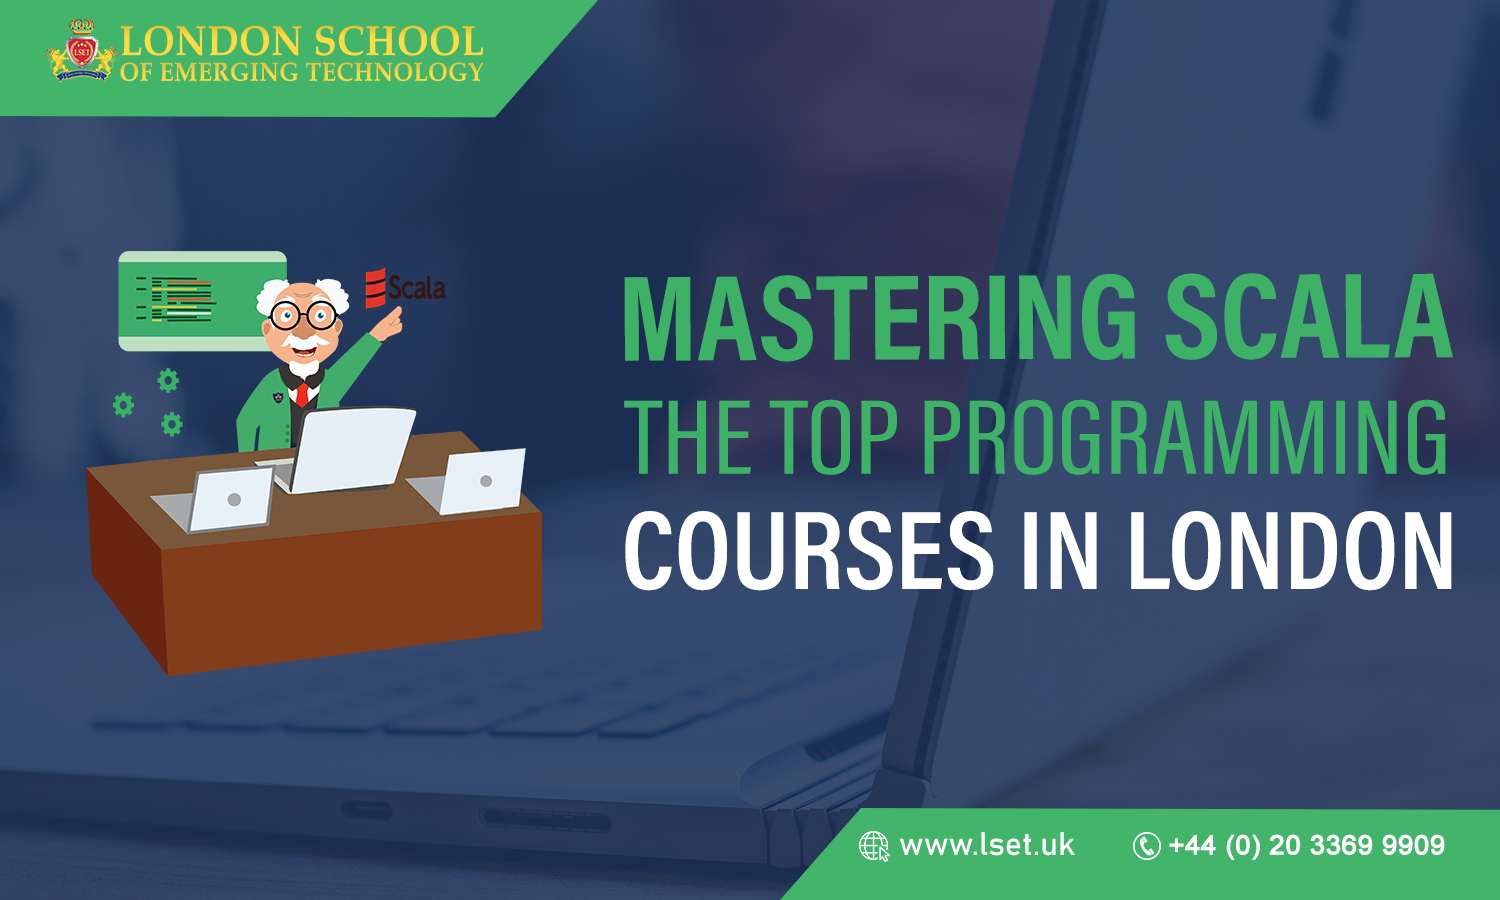 Mastering Scala The Top Programming Courses in London 4.48.20 PM